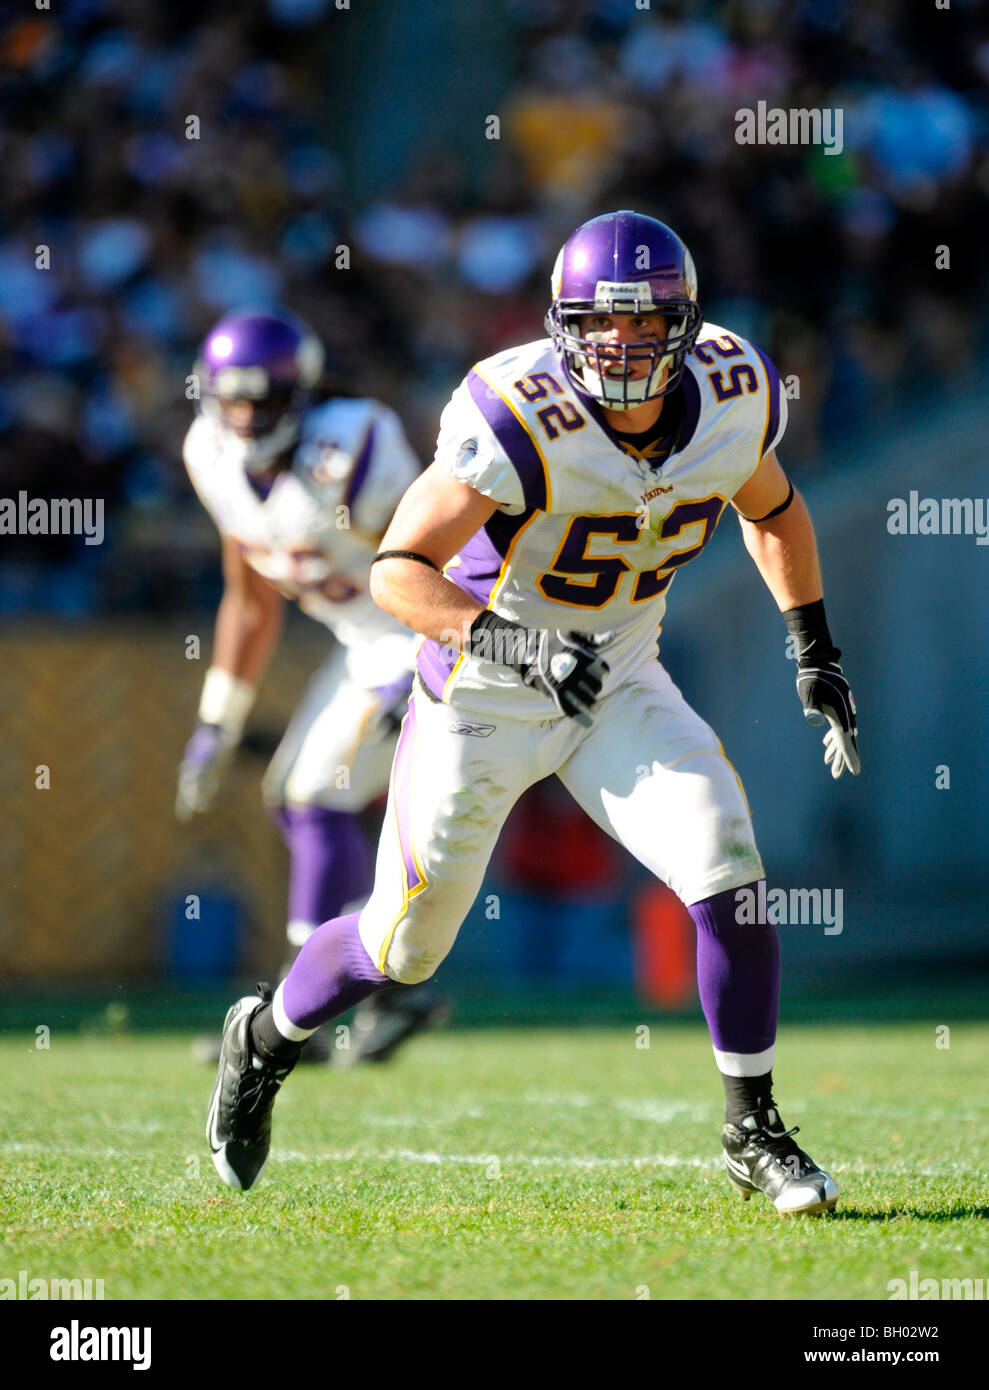 Chad Greenway #52 of the Minnesota Vikings defends Stock Photo